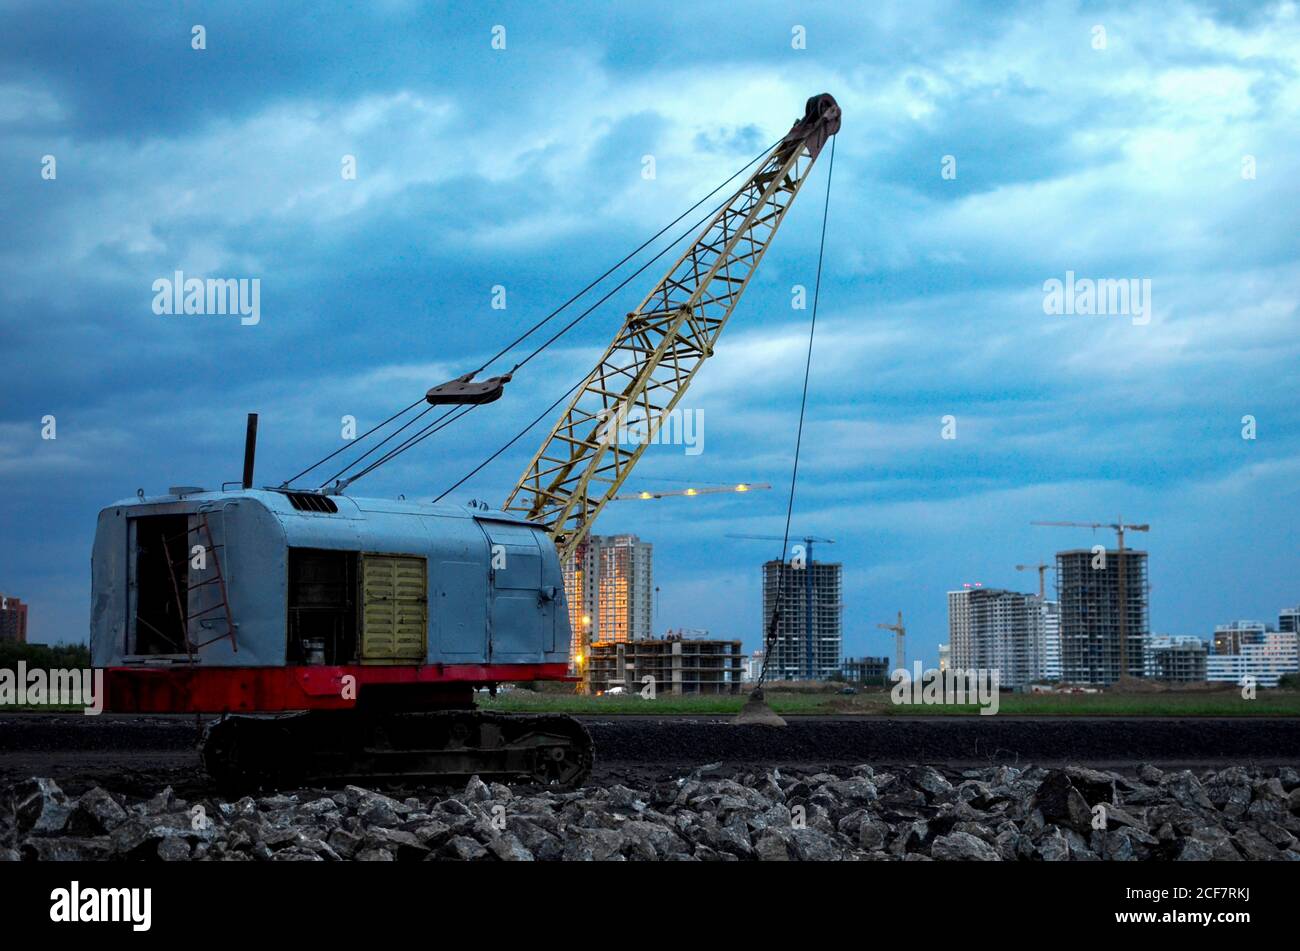 Large crawler crane or dragline excavator with a heavy metal wrecking ball on a steel cable. Wrecking balls at construction sites. Dismantling and dem Stock Photo